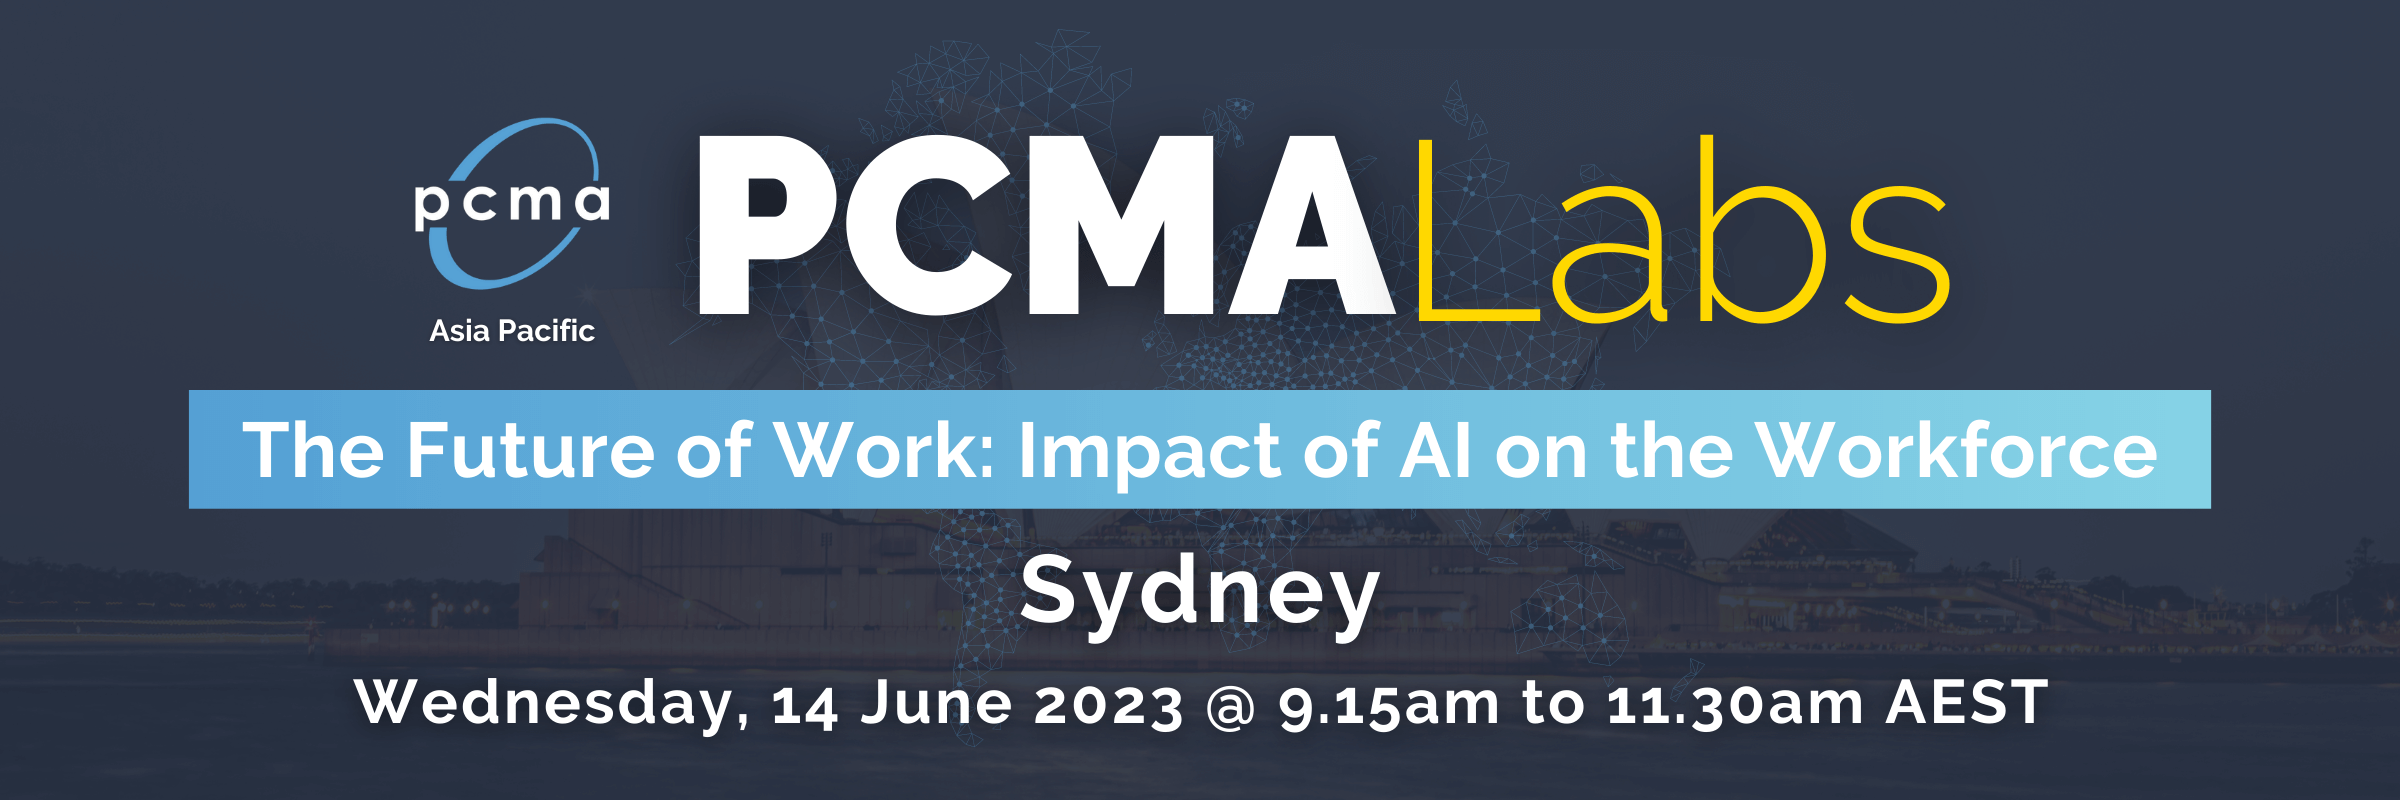 PCMA APAC Labs (Sydney) - The Future of Work: Impact of AI on the Workforce on 14 June 2023